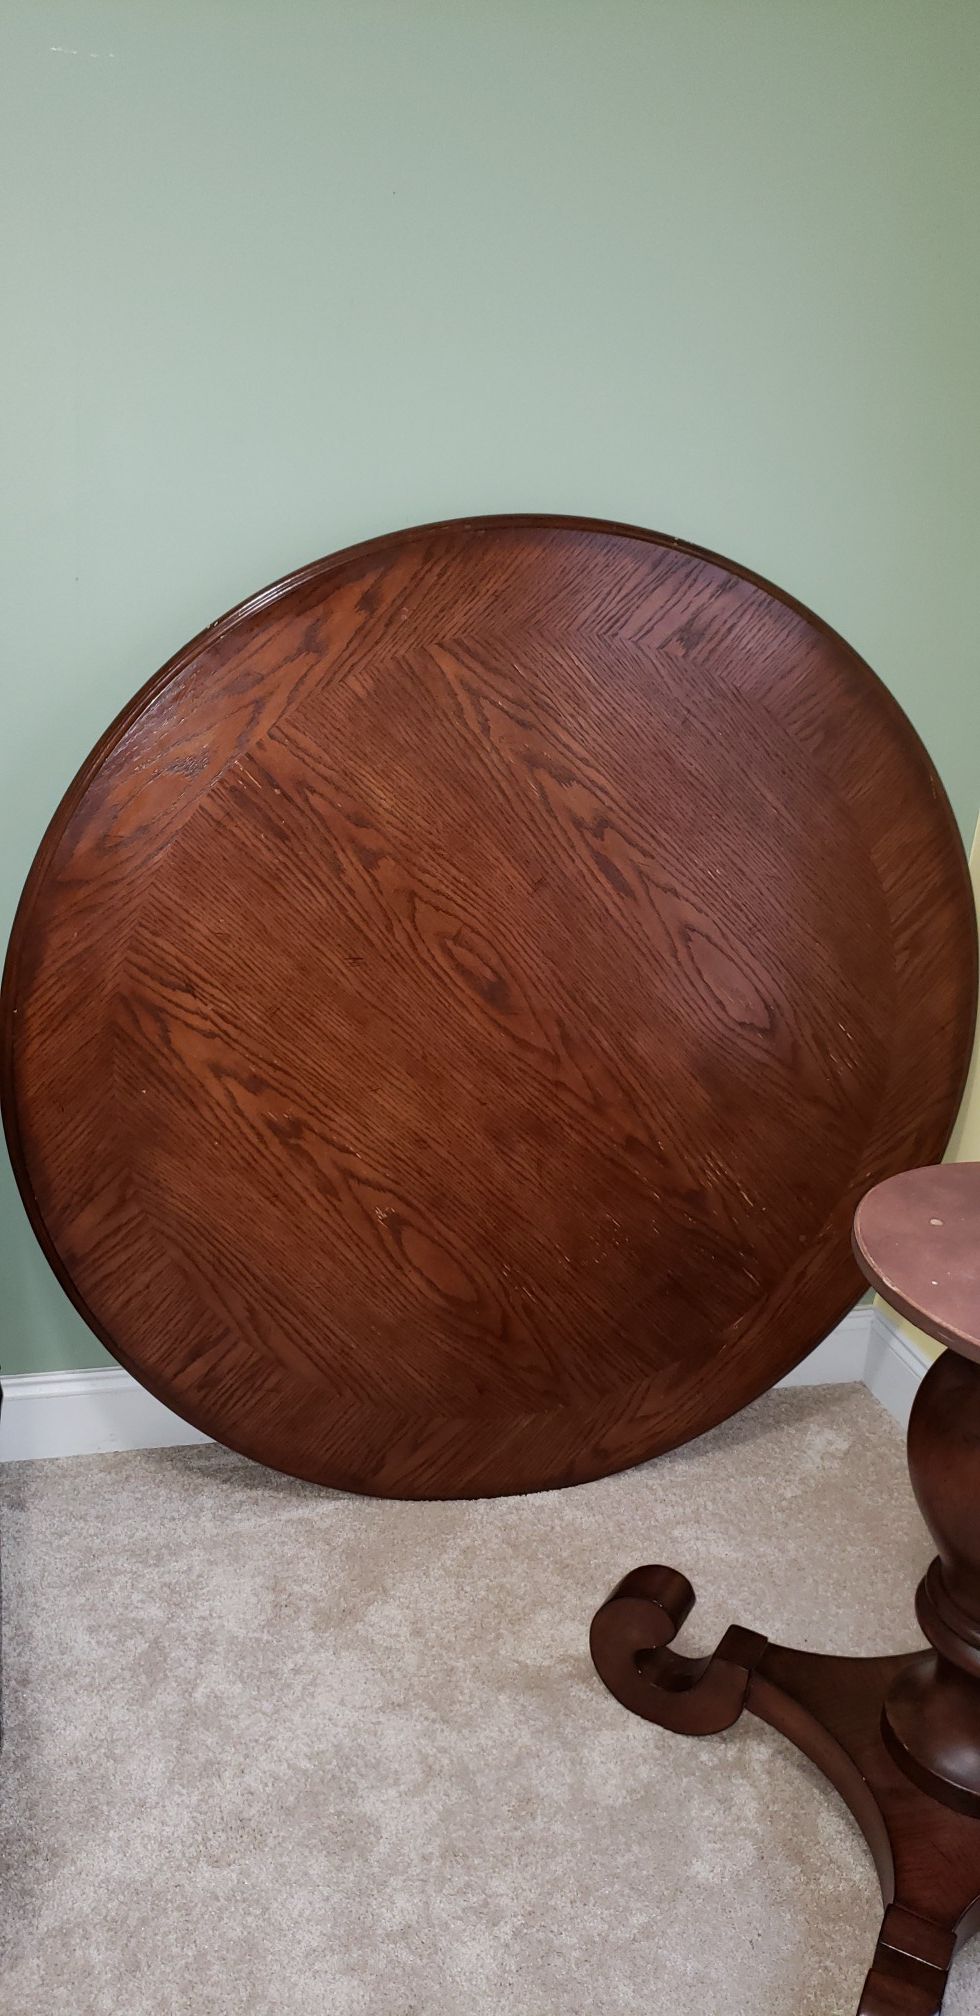 Round dining table & 4 chairs $100 FIRM